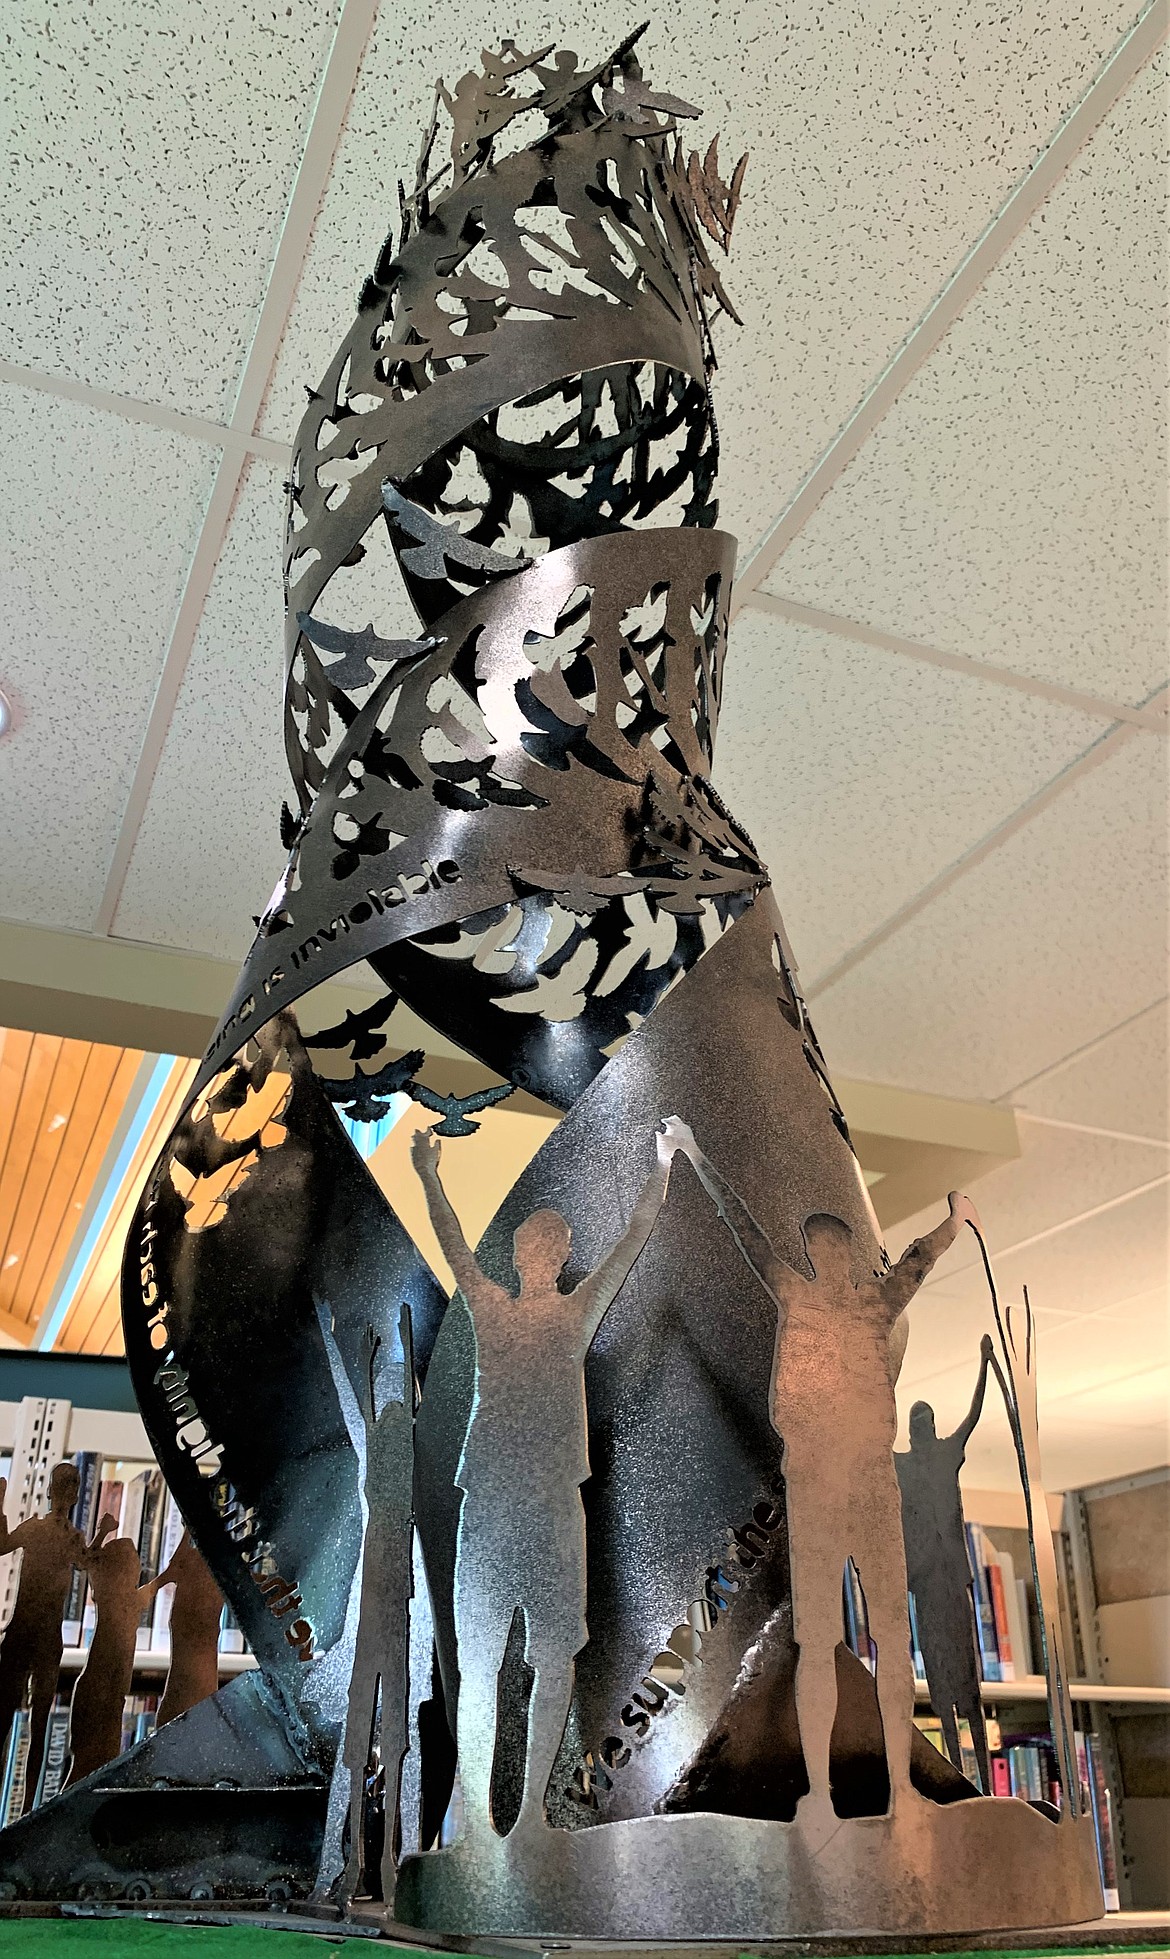 A model of “The Monument to Peace and Unity” is displayed in the Coeur d'Alene Public Library.  A dedication ceremony is set for Friday at the Four Corners intersection of Northwest Boulevard, Government Way, and Fort Grounds Drive.